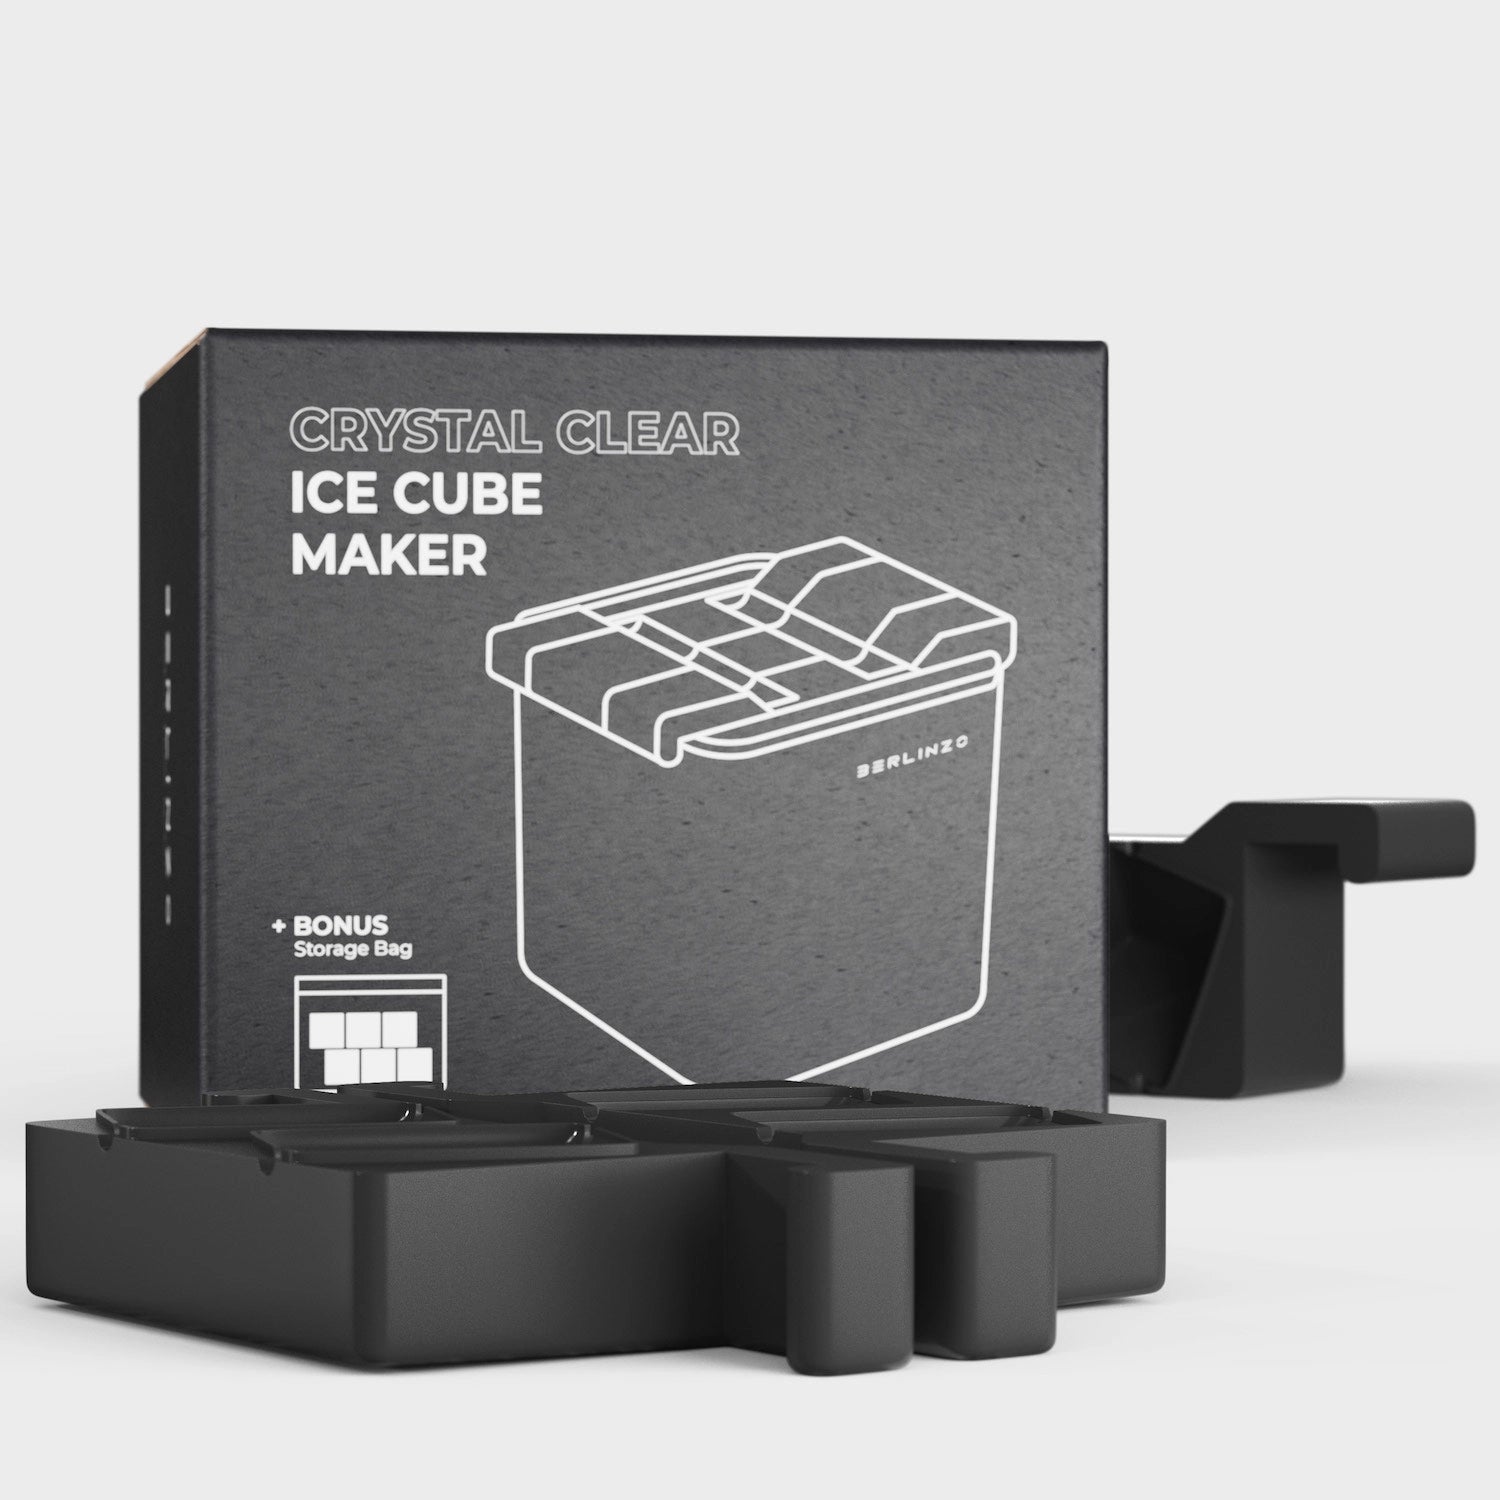 Crystal Clear Ice Cube Maker - Make 6 Large Ice Cubes Upgrade 4x1.6x2inch  Clear Ice Cube Tray BPA-free Silicone for Gifts,Cocktail,Whiskey,Bourbon